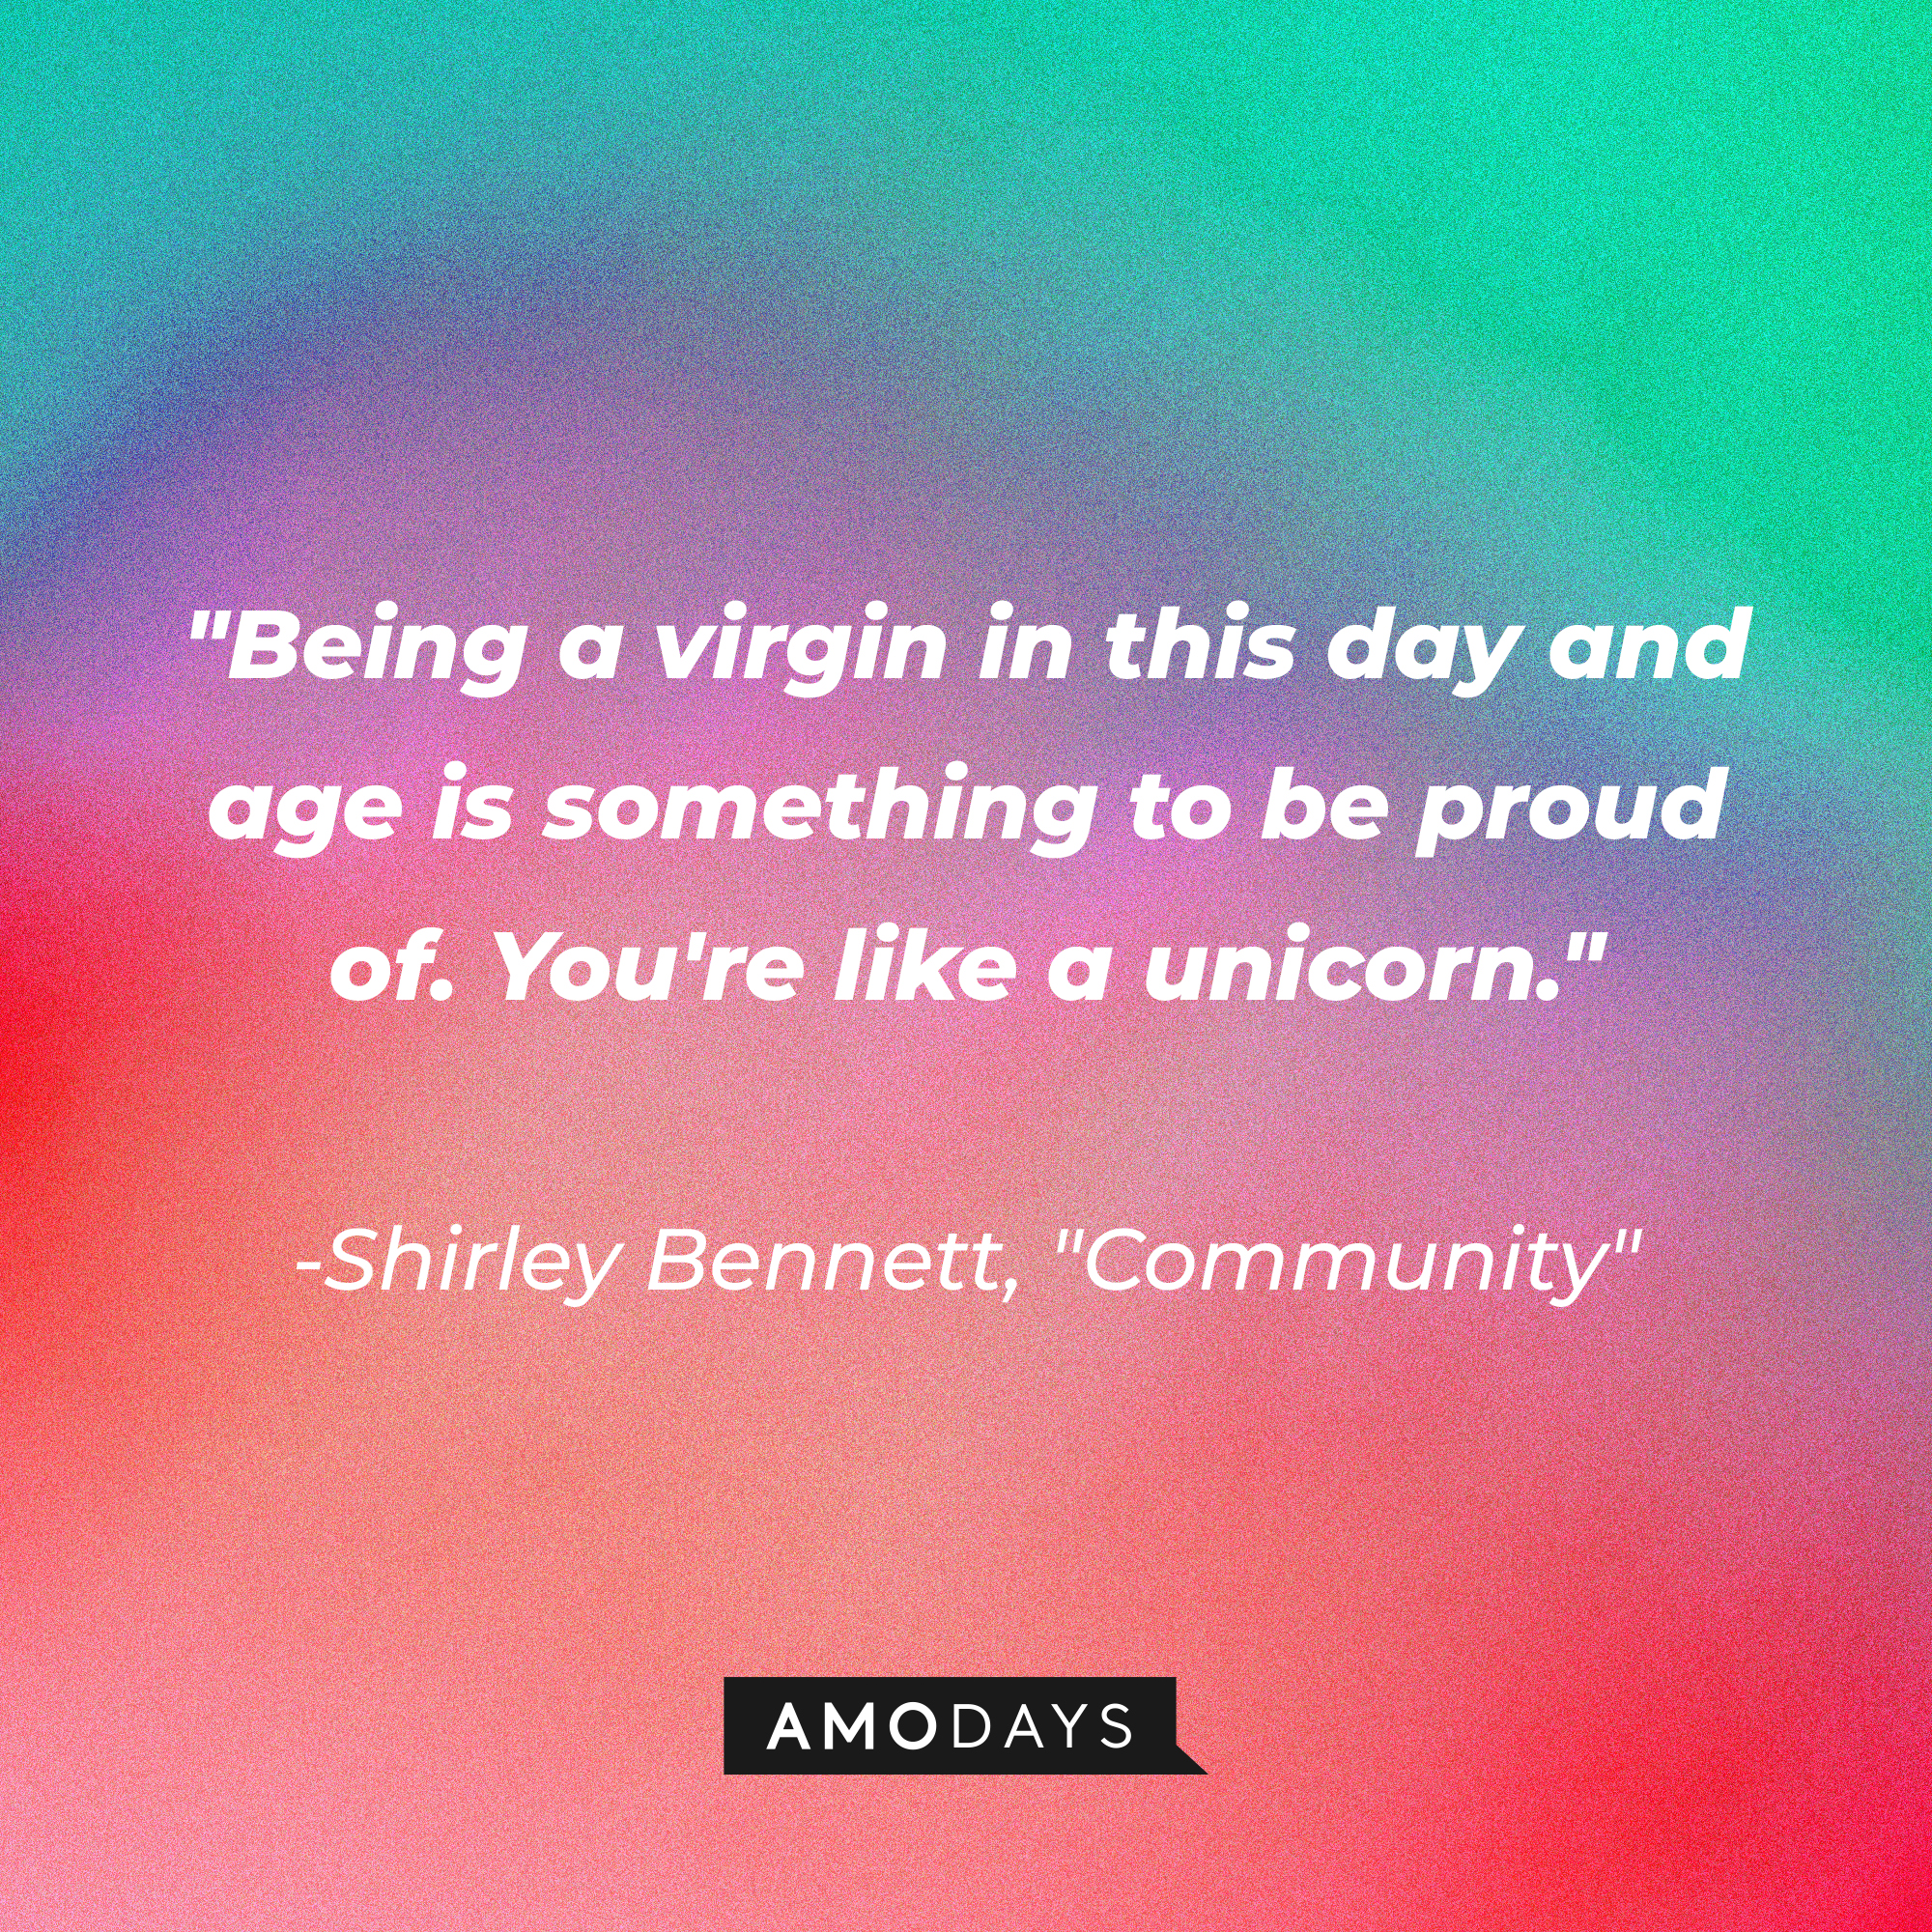 Shirley Bennett's quote: "Being a virgin in this day and age is something to be proud of. You're like a unicorn." | Source: Amodays